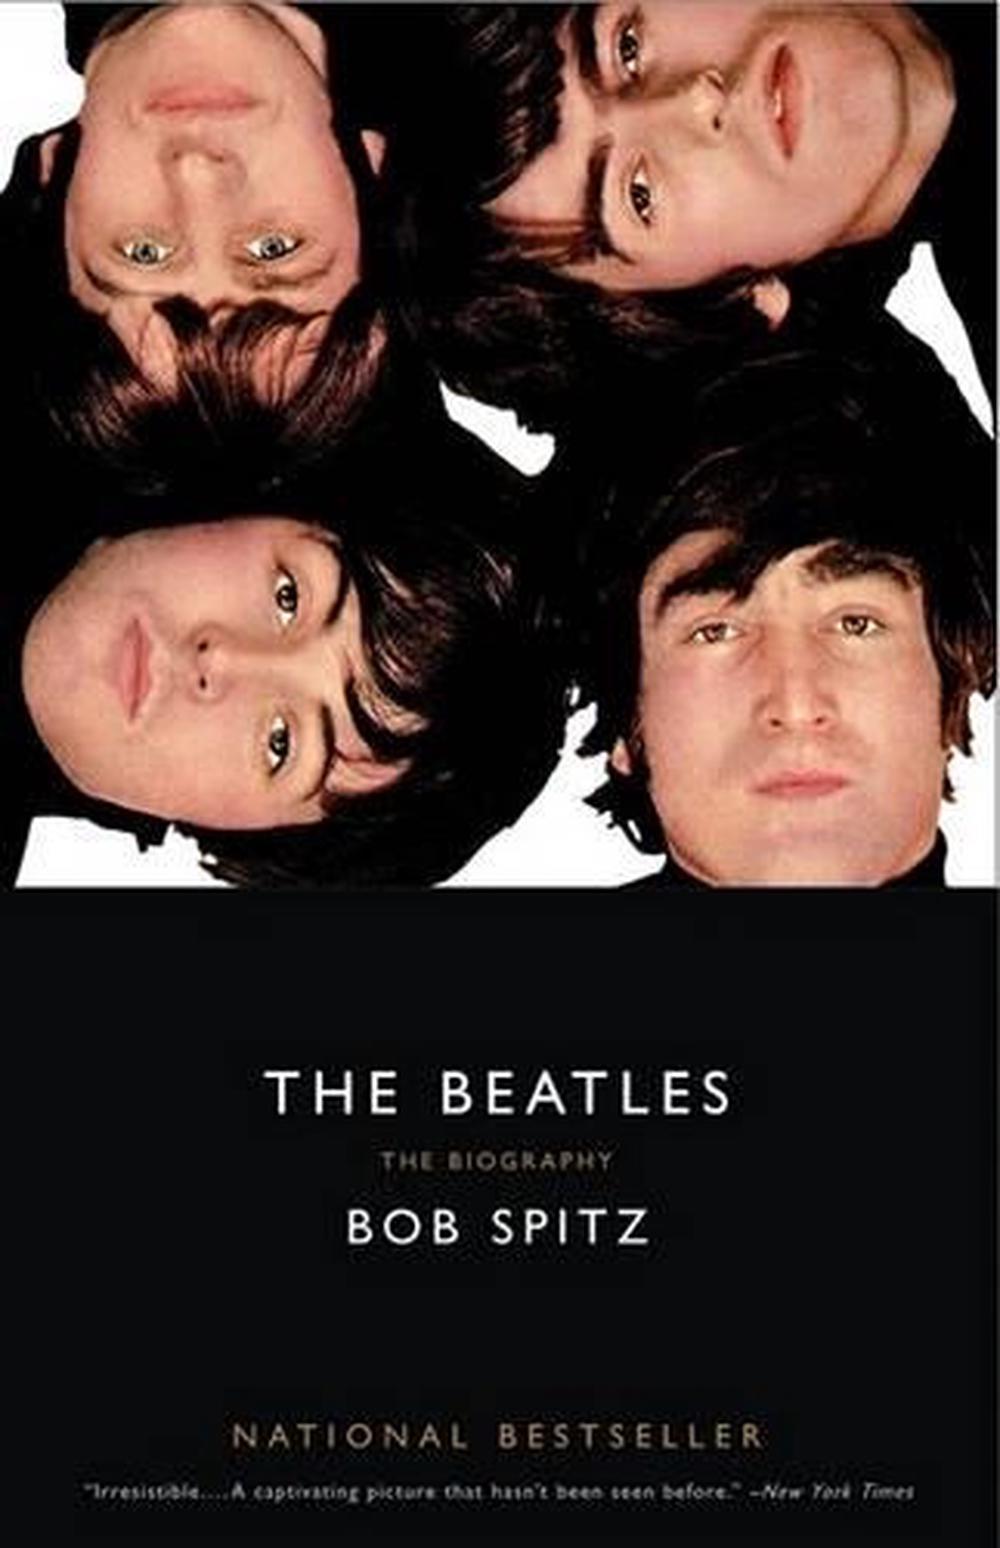 The Beatles The Biography by Bob Spitz (English) Paperback Book Free